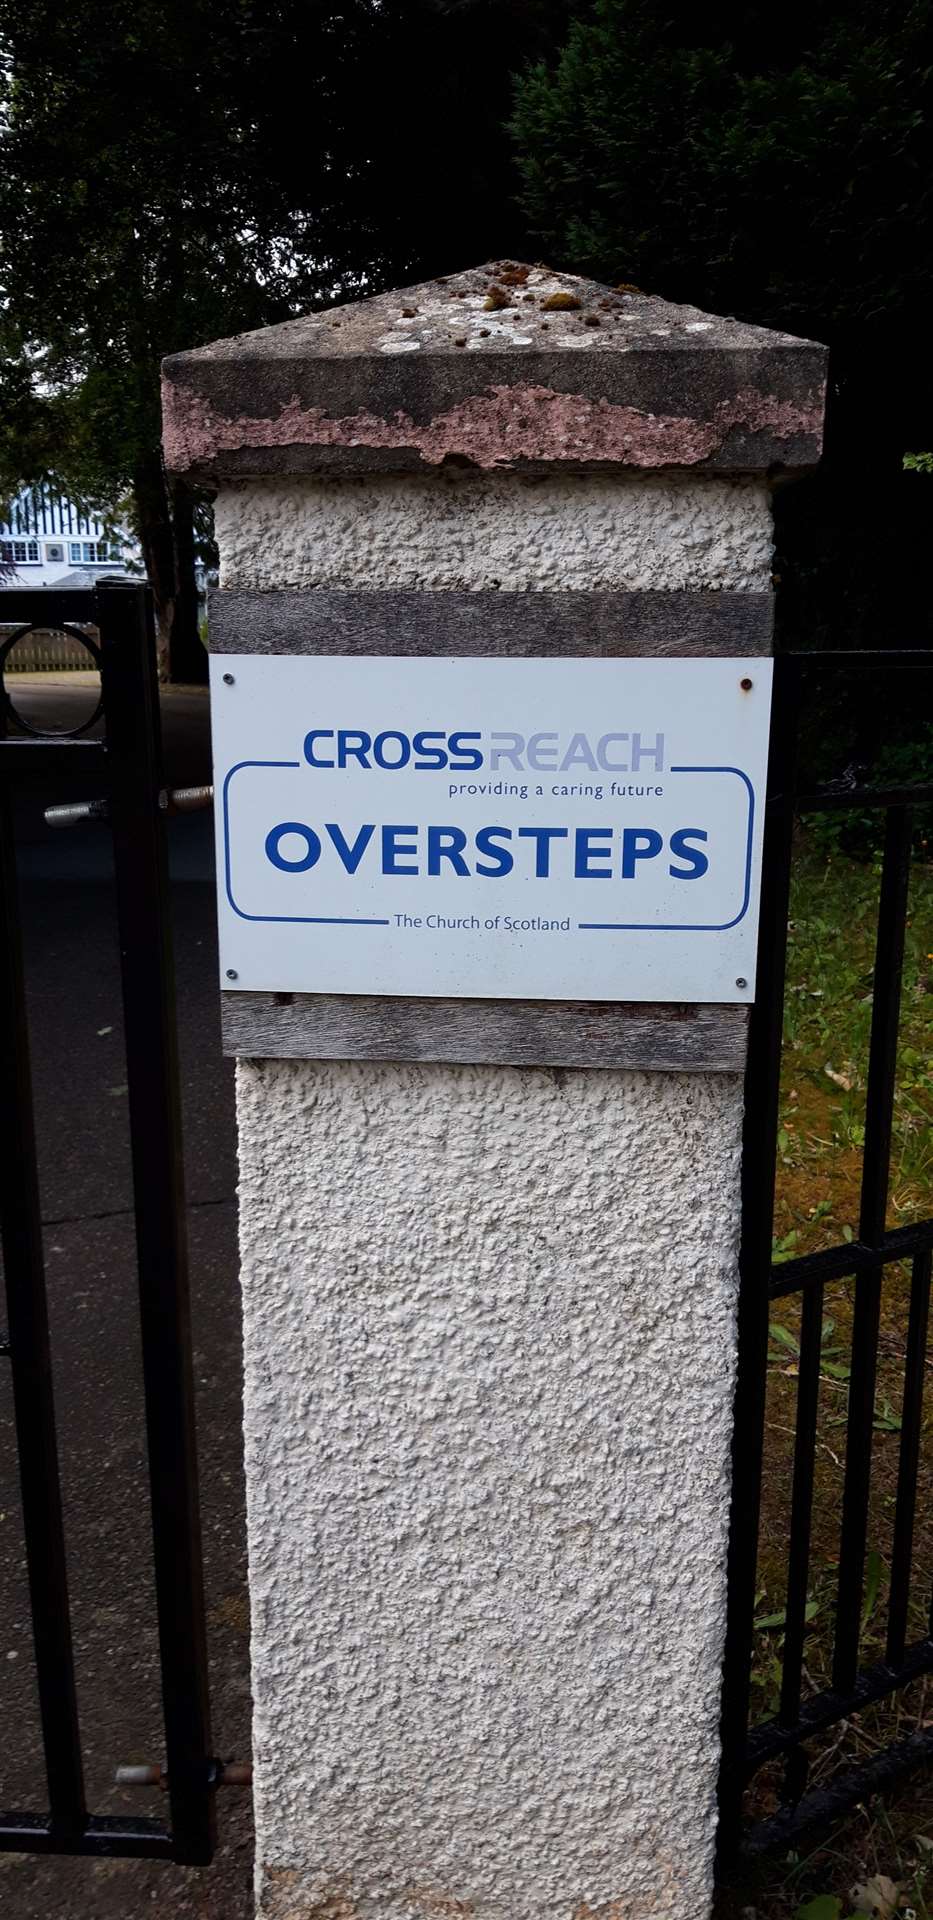 Oversteps has capacity to care for 24 elderly residents.